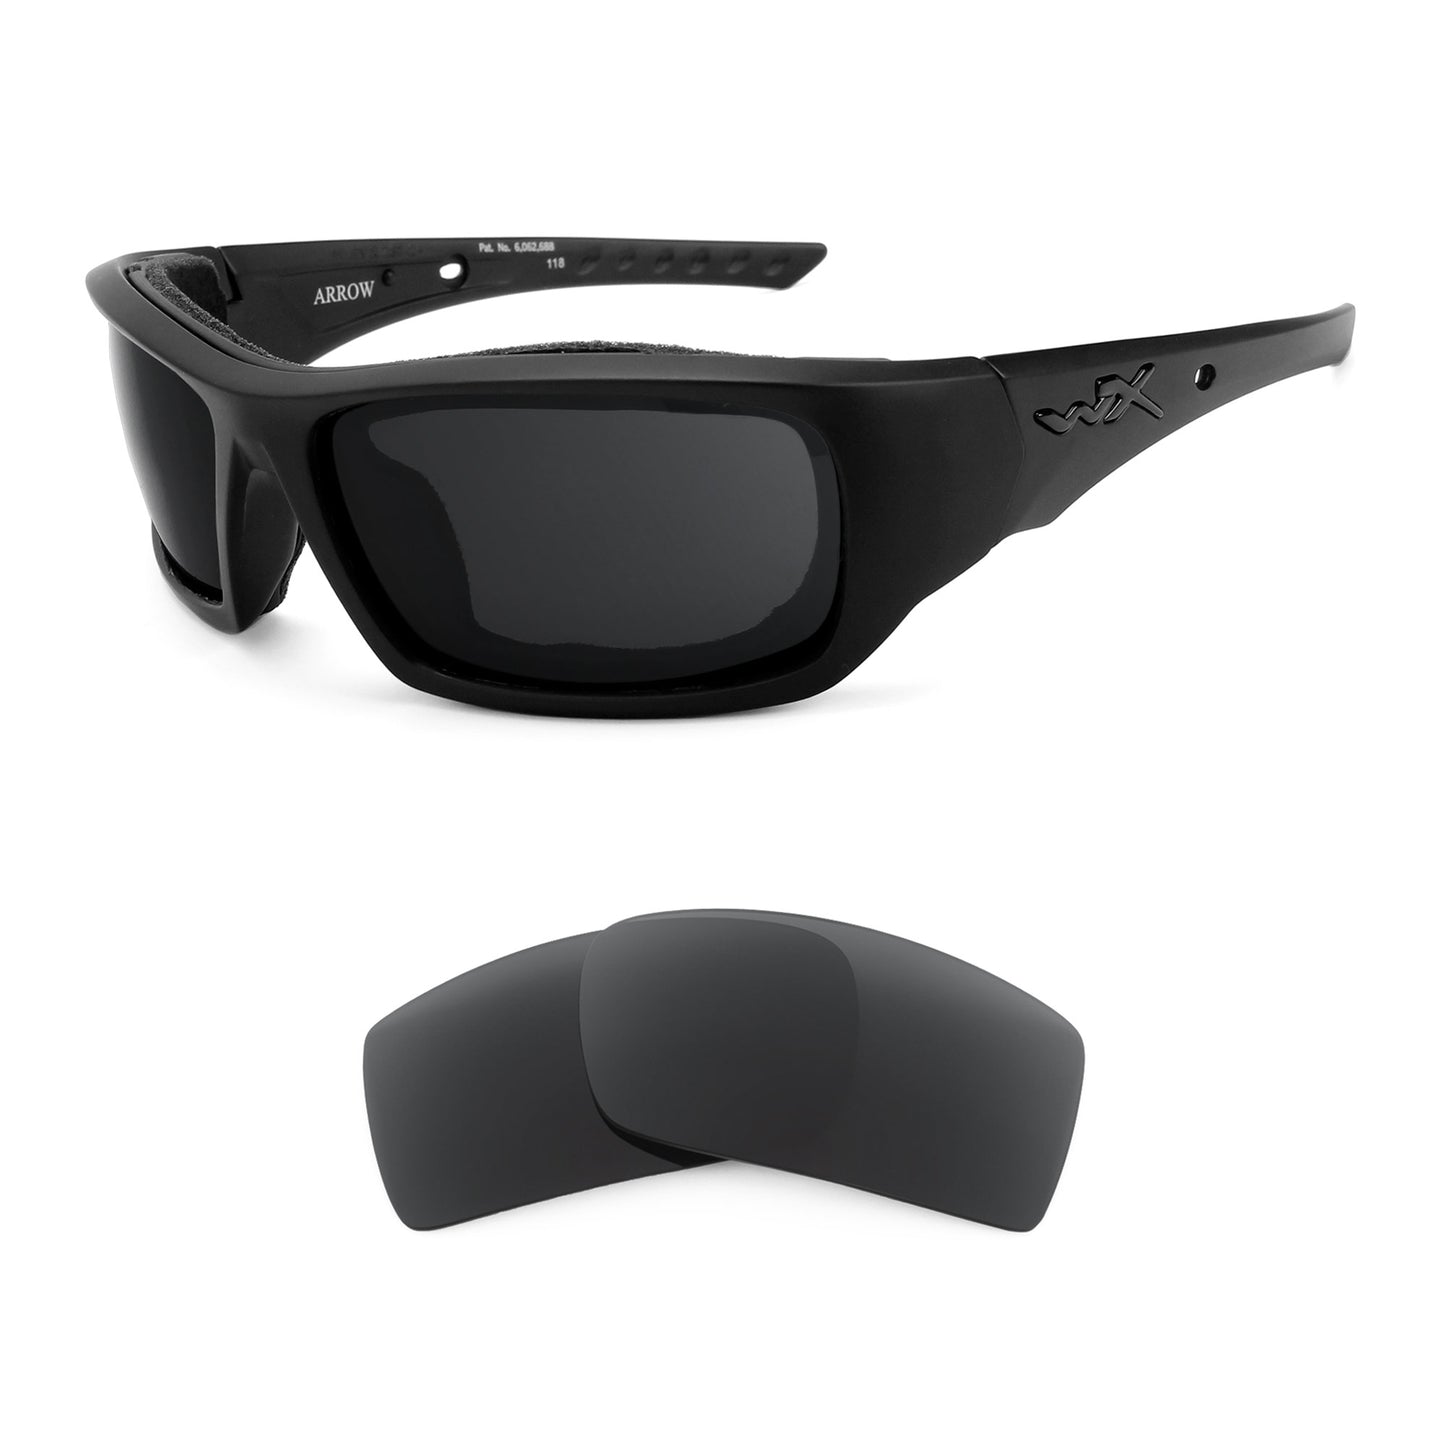 Wiley X Arrow sunglasses with replacement lenses